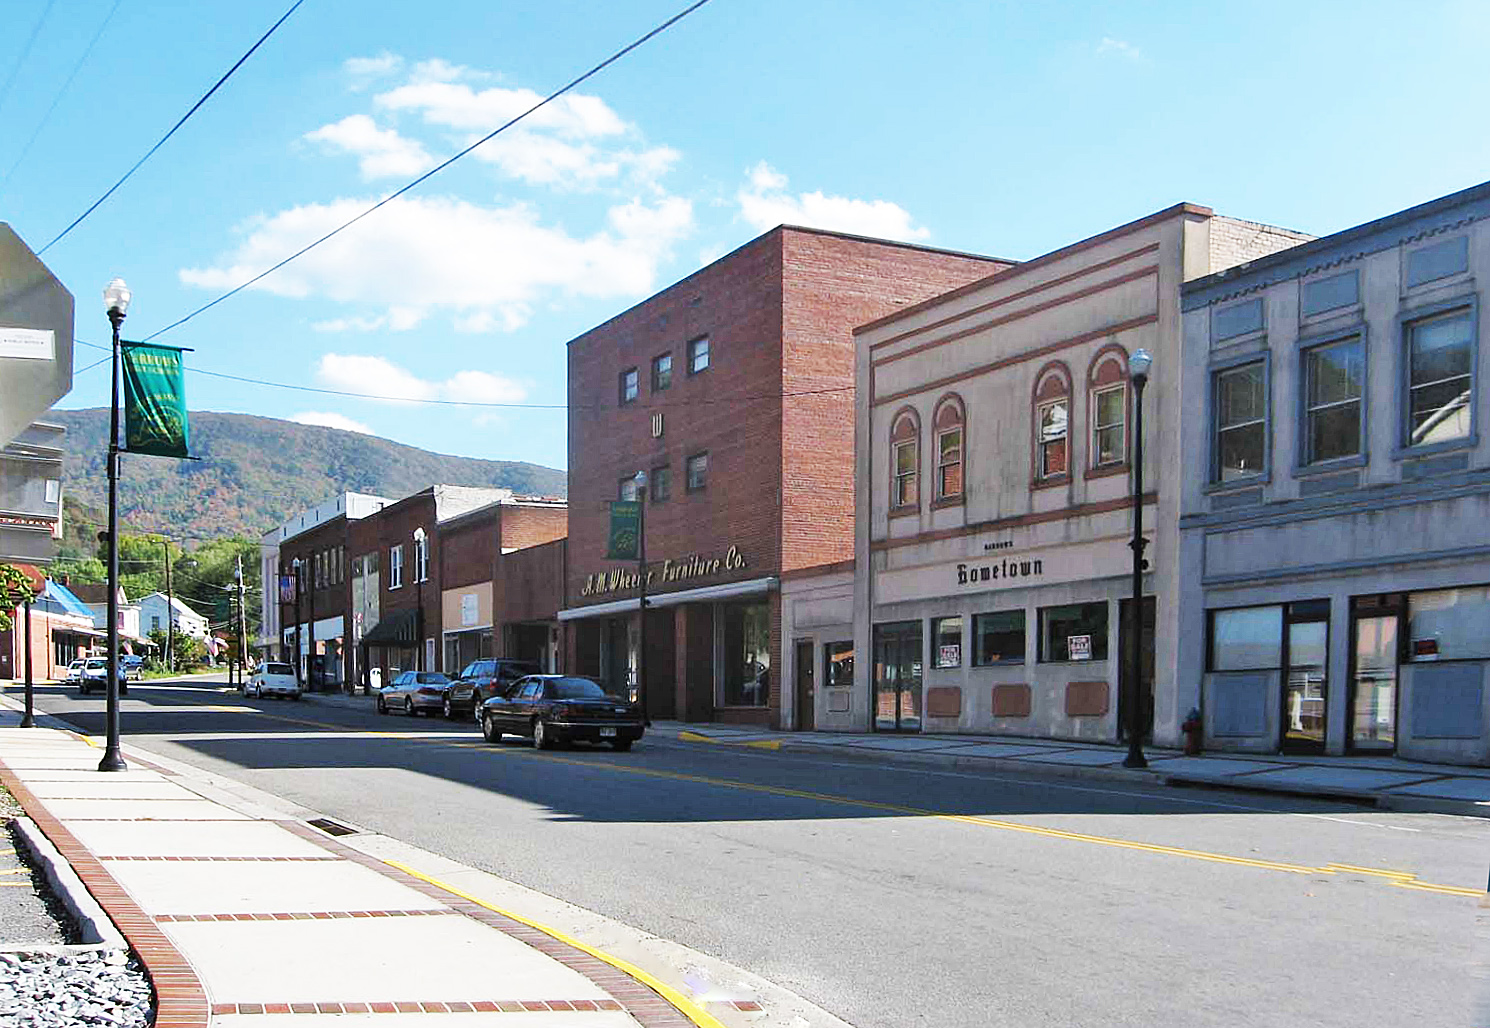 Narrows Commercial Historic District